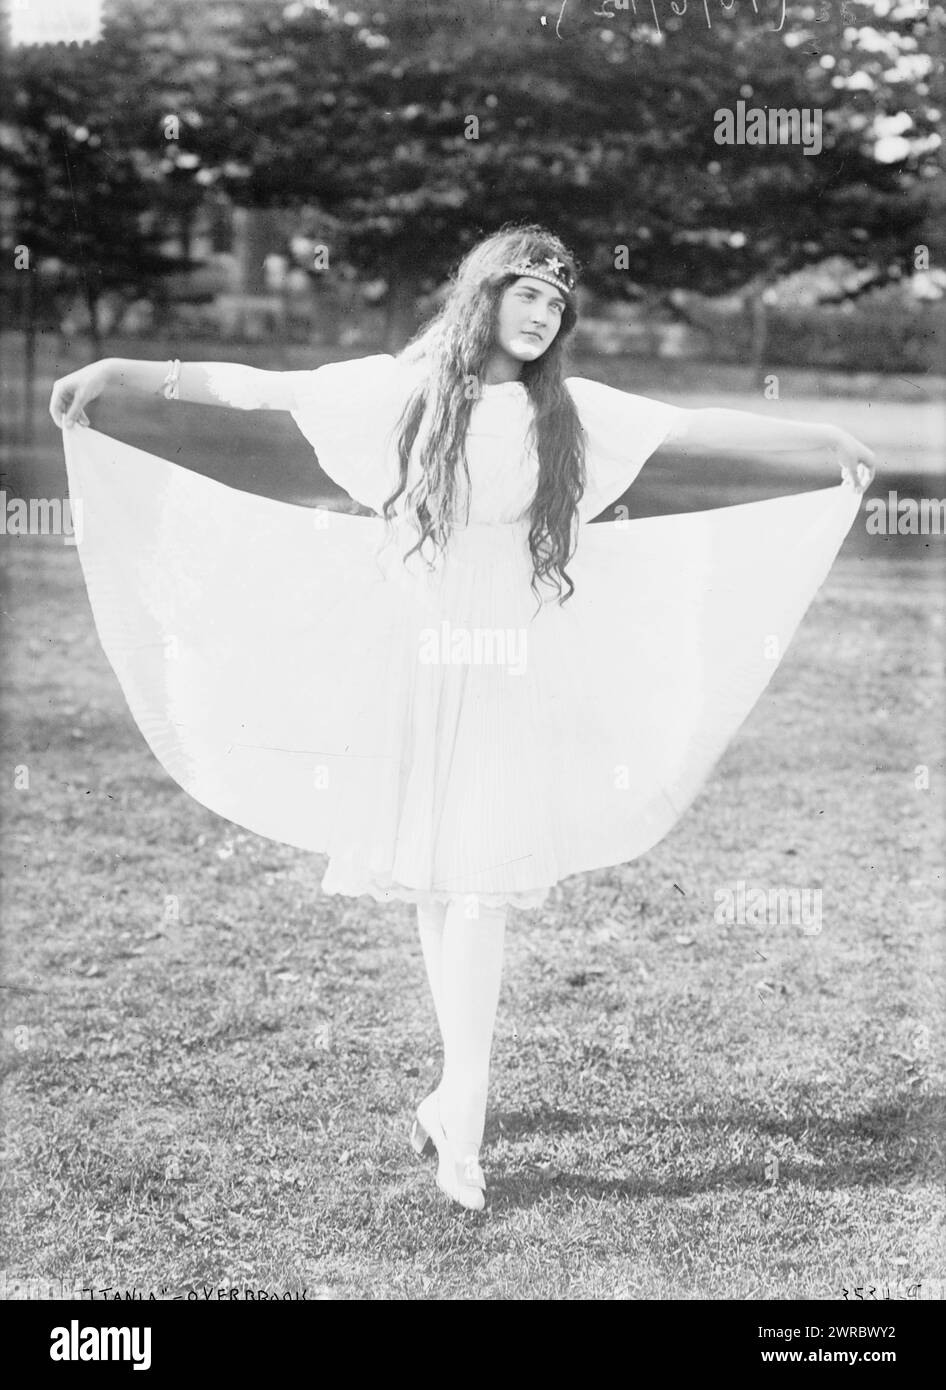 Titania', Overbrook dancing, Photograph shows a student at the Pennsylvania Institute for the Blind, also known as Overbrook School for the Blind in the role of Titania in Midsummer's Night Dream., between ca. 1910 and ca. 1915, Glass negatives, 1 negative: glass Stock Photo